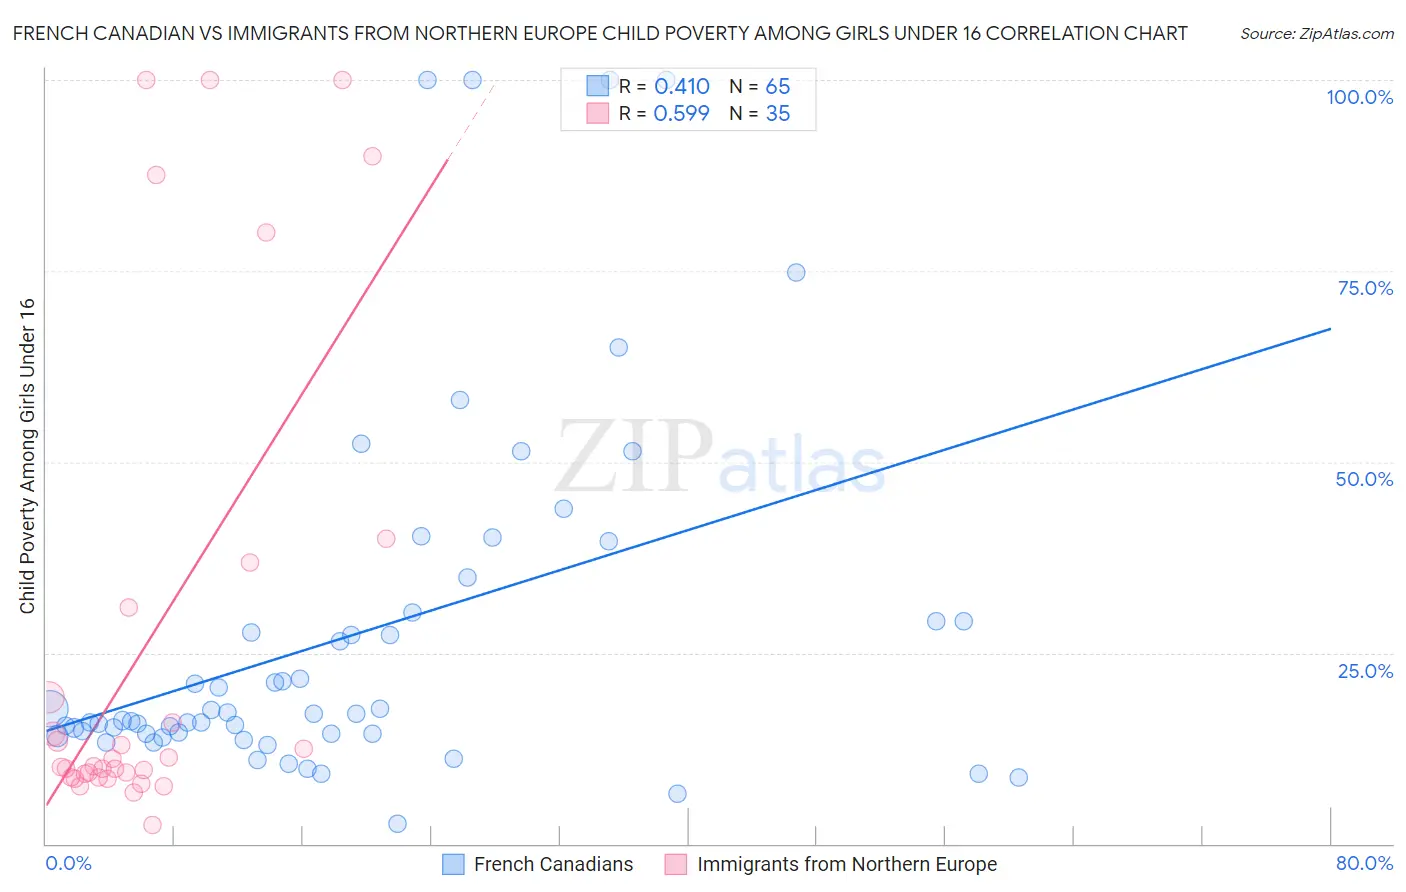 French Canadian vs Immigrants from Northern Europe Child Poverty Among Girls Under 16